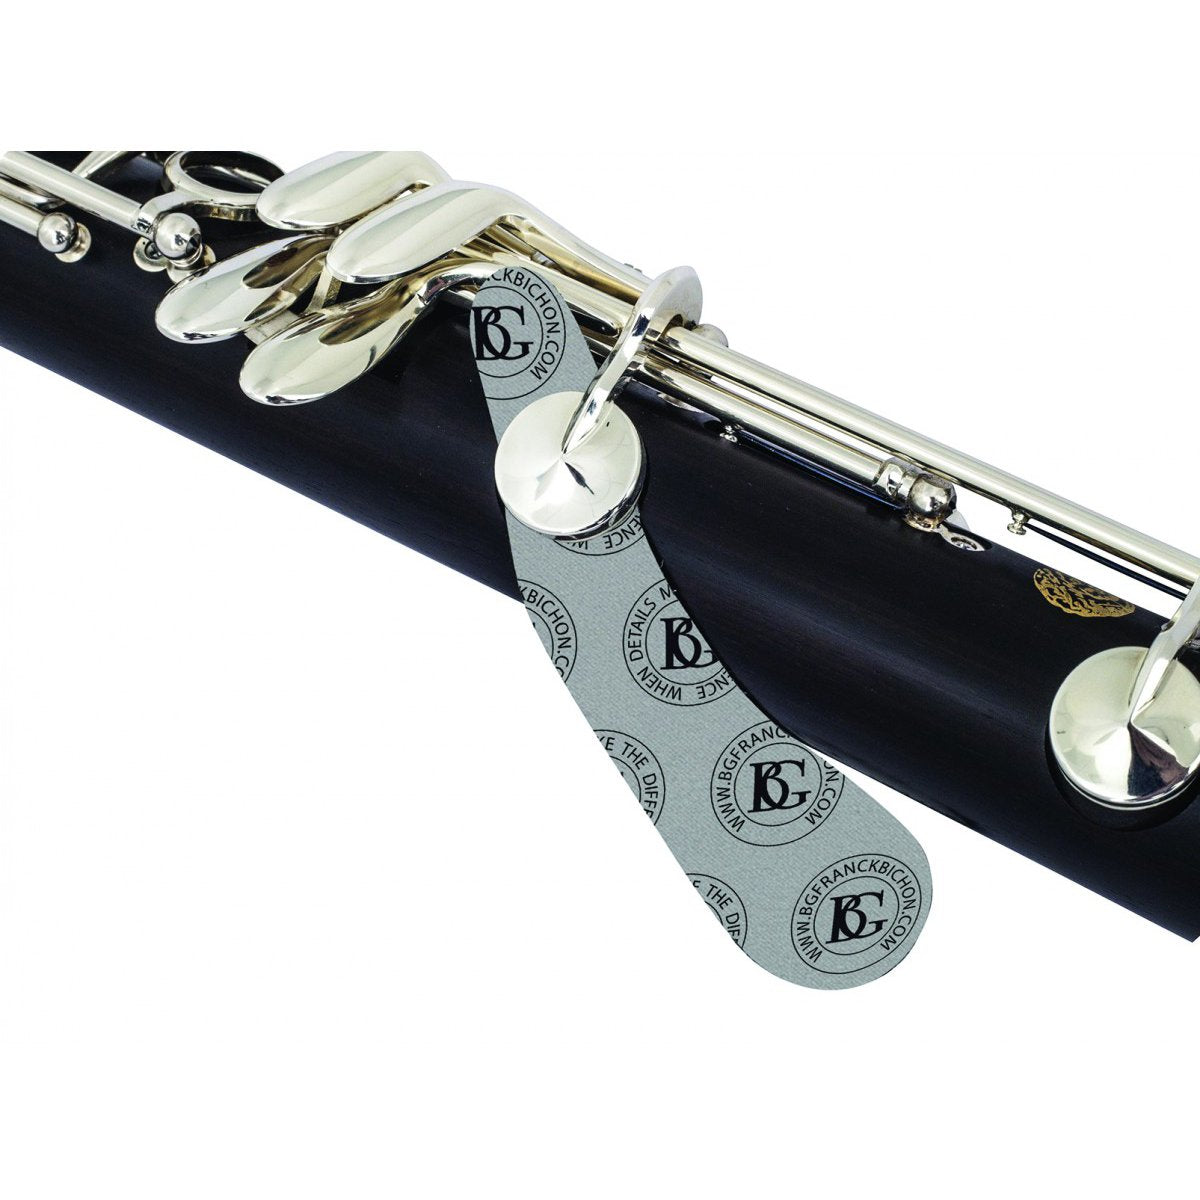 BG France - Microfiber Pad Dryer for Flutes, Oboes, Clarinets, Bassoons, and English Horns-Accessories-BG France-Music Elements